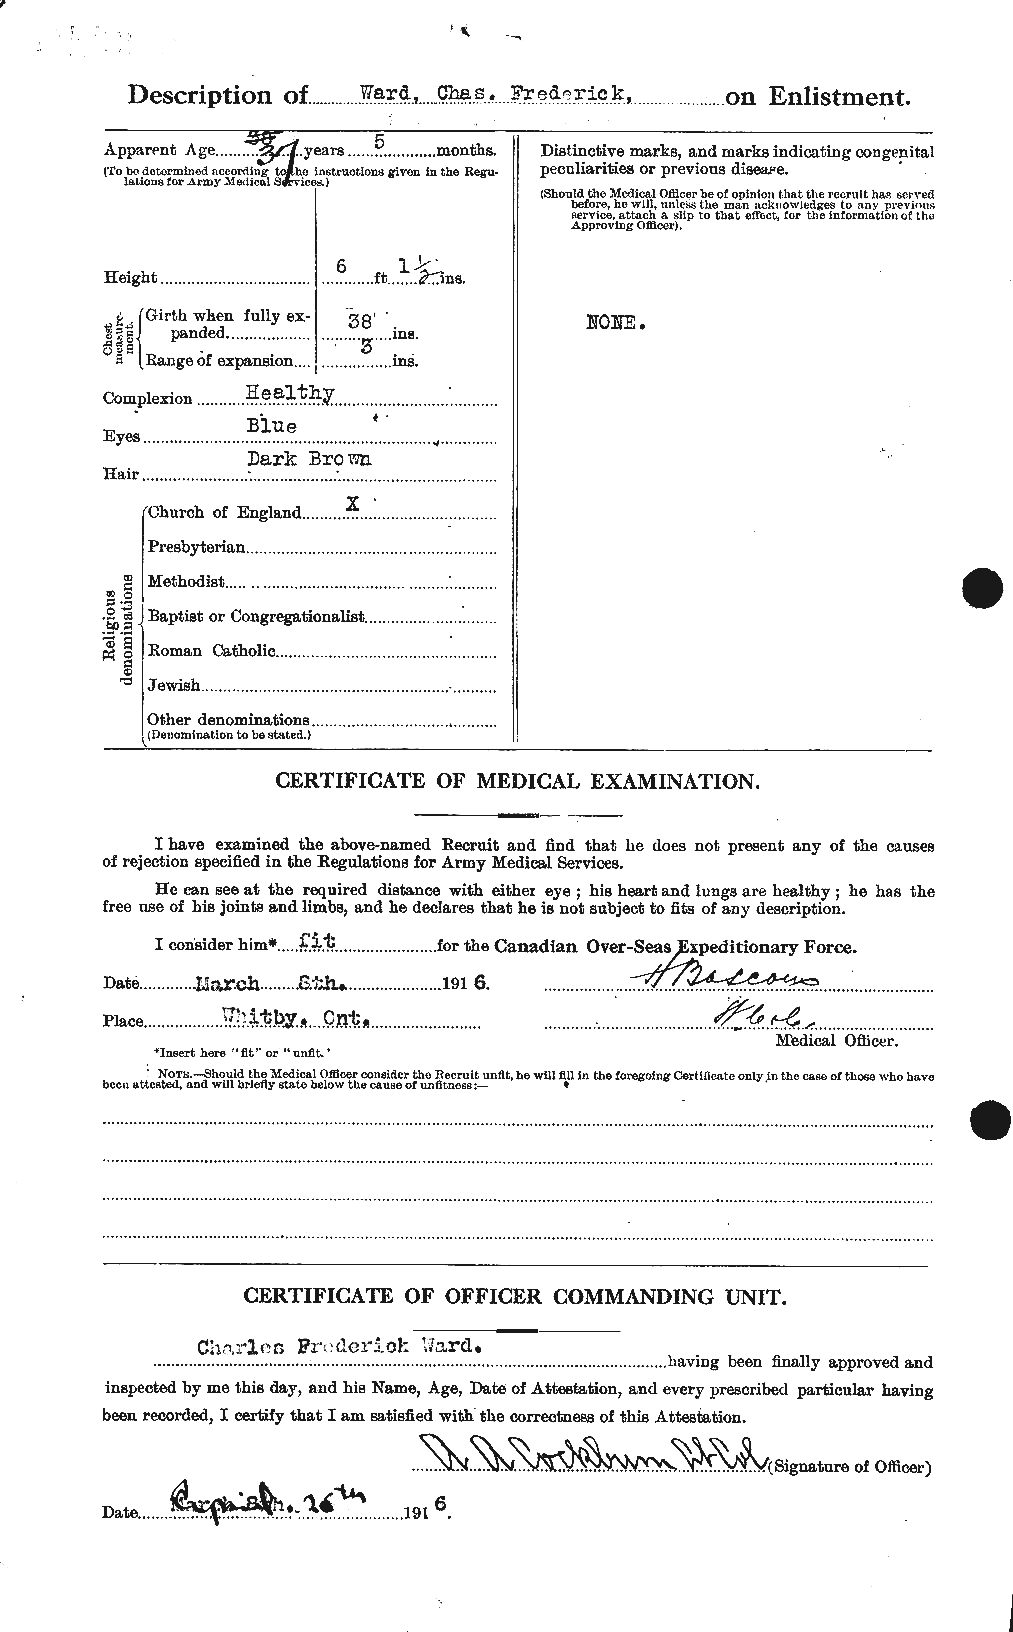 Personnel Records of the First World War - CEF 657579b